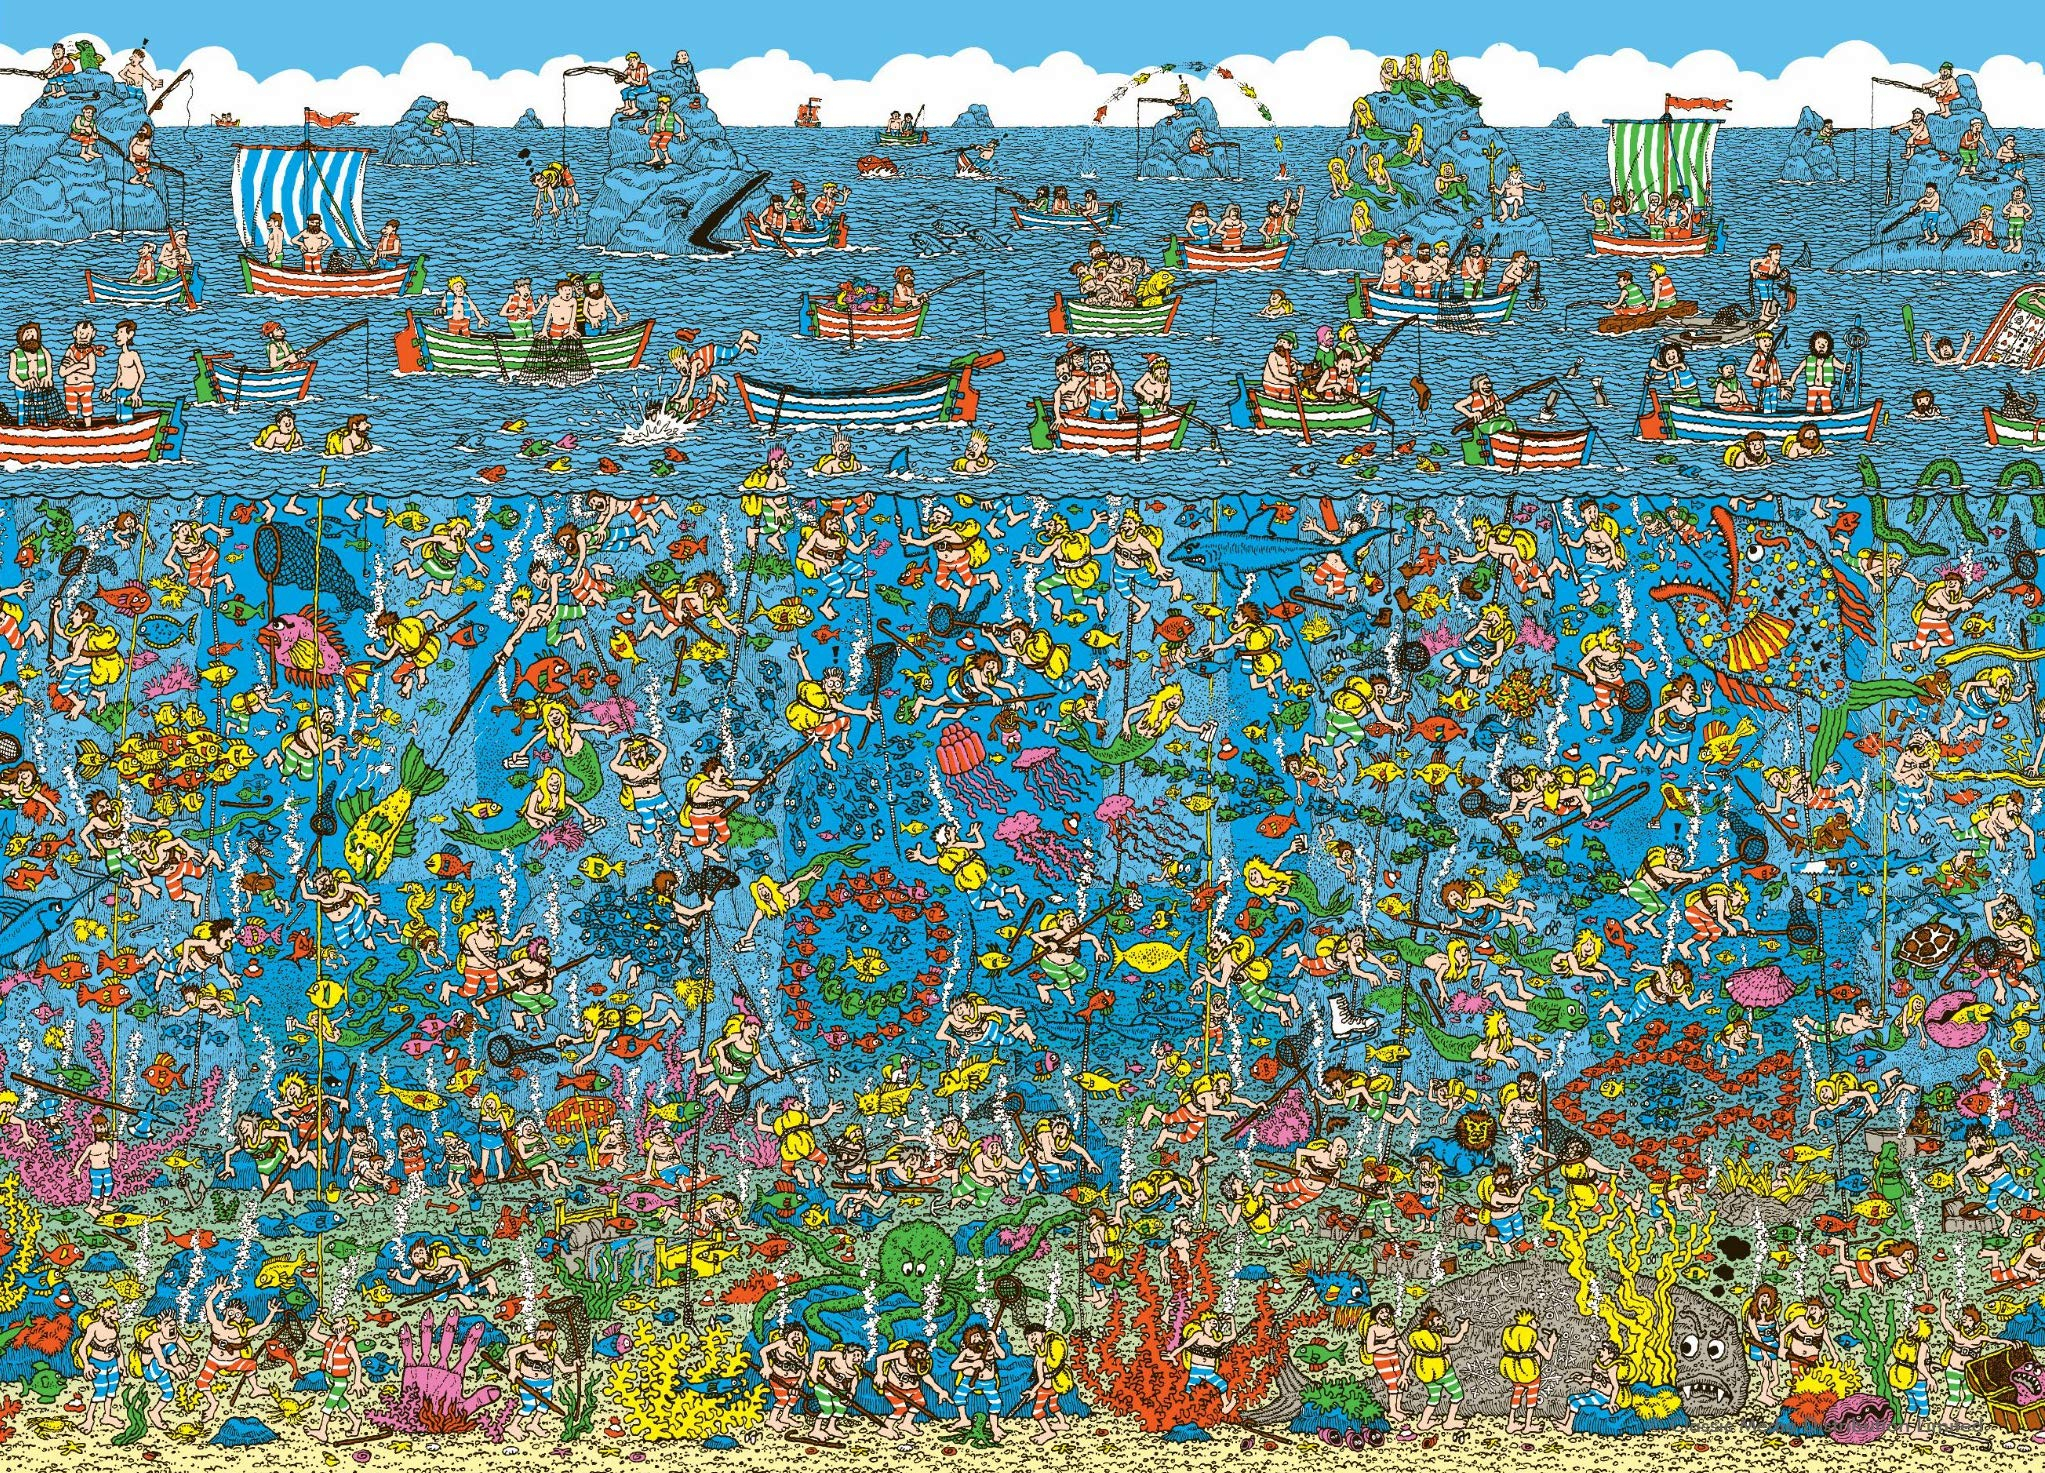 2045x1473 Jigsaw Puzzle 300 Pieces Where's Waldo Deep Sea Divers, Puzzles for Adults 300 Pieces, Jigsaw Puzzles for Child, Adults Home Decor: Buy Online at Best Price in UAE